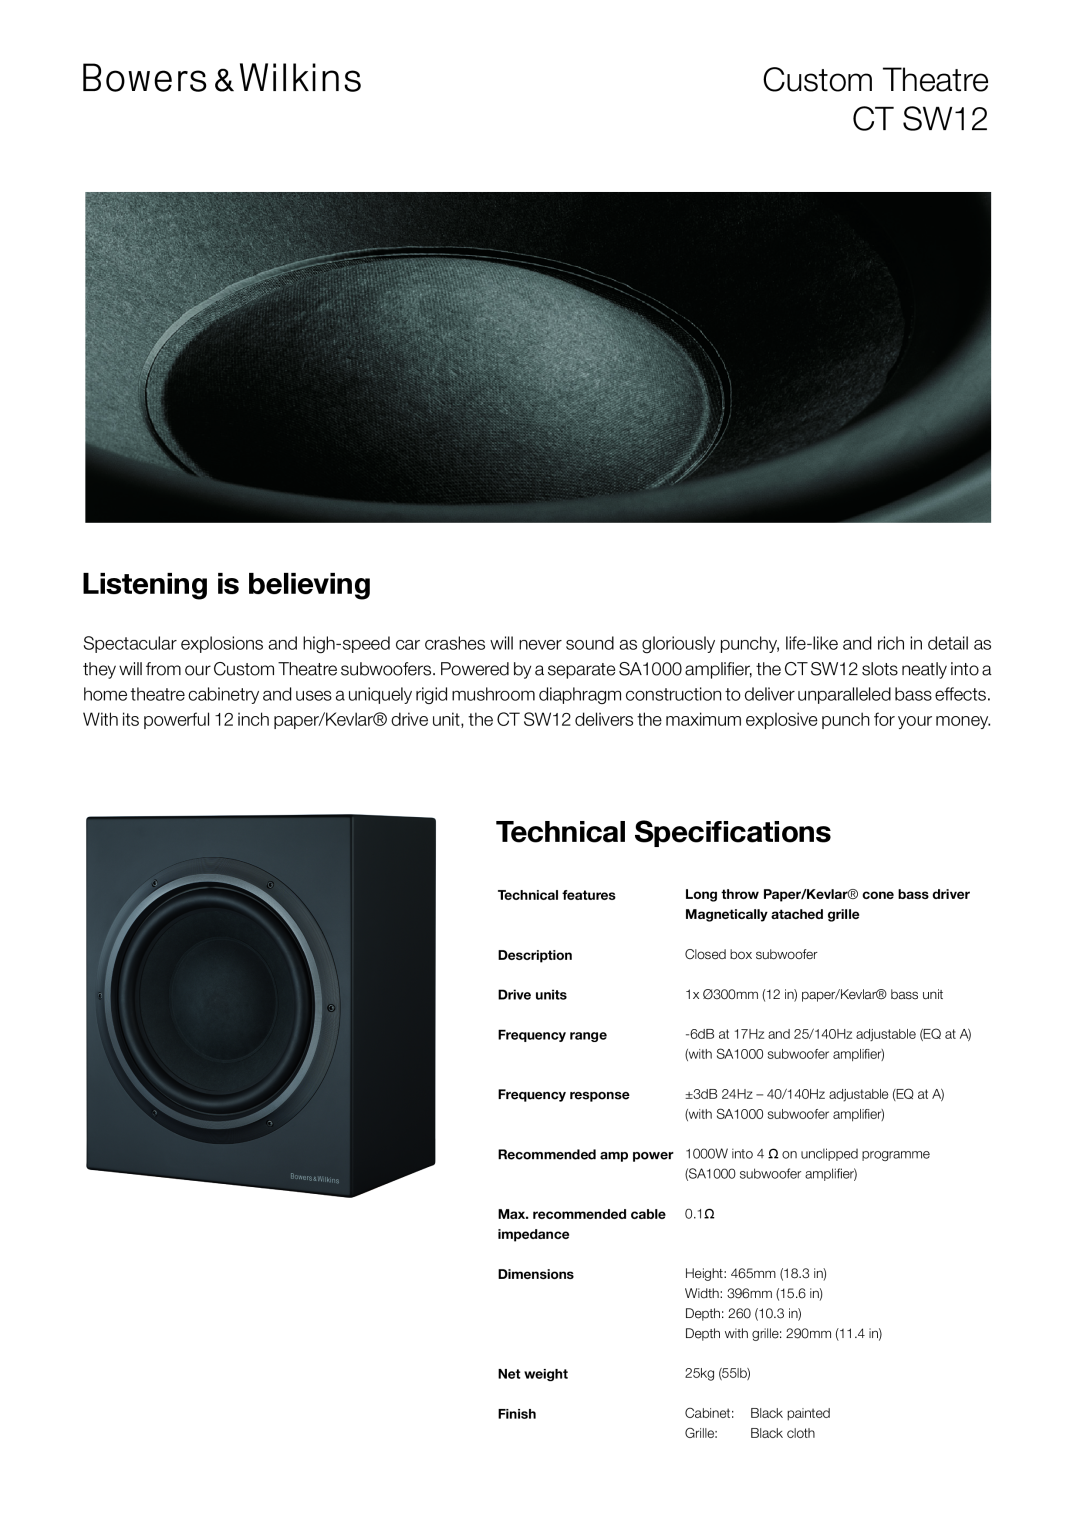 Bowers & Wilkins CT SW10 dimensions Custom Theatre CT SW12, Listening is believing, Technical Specifications 